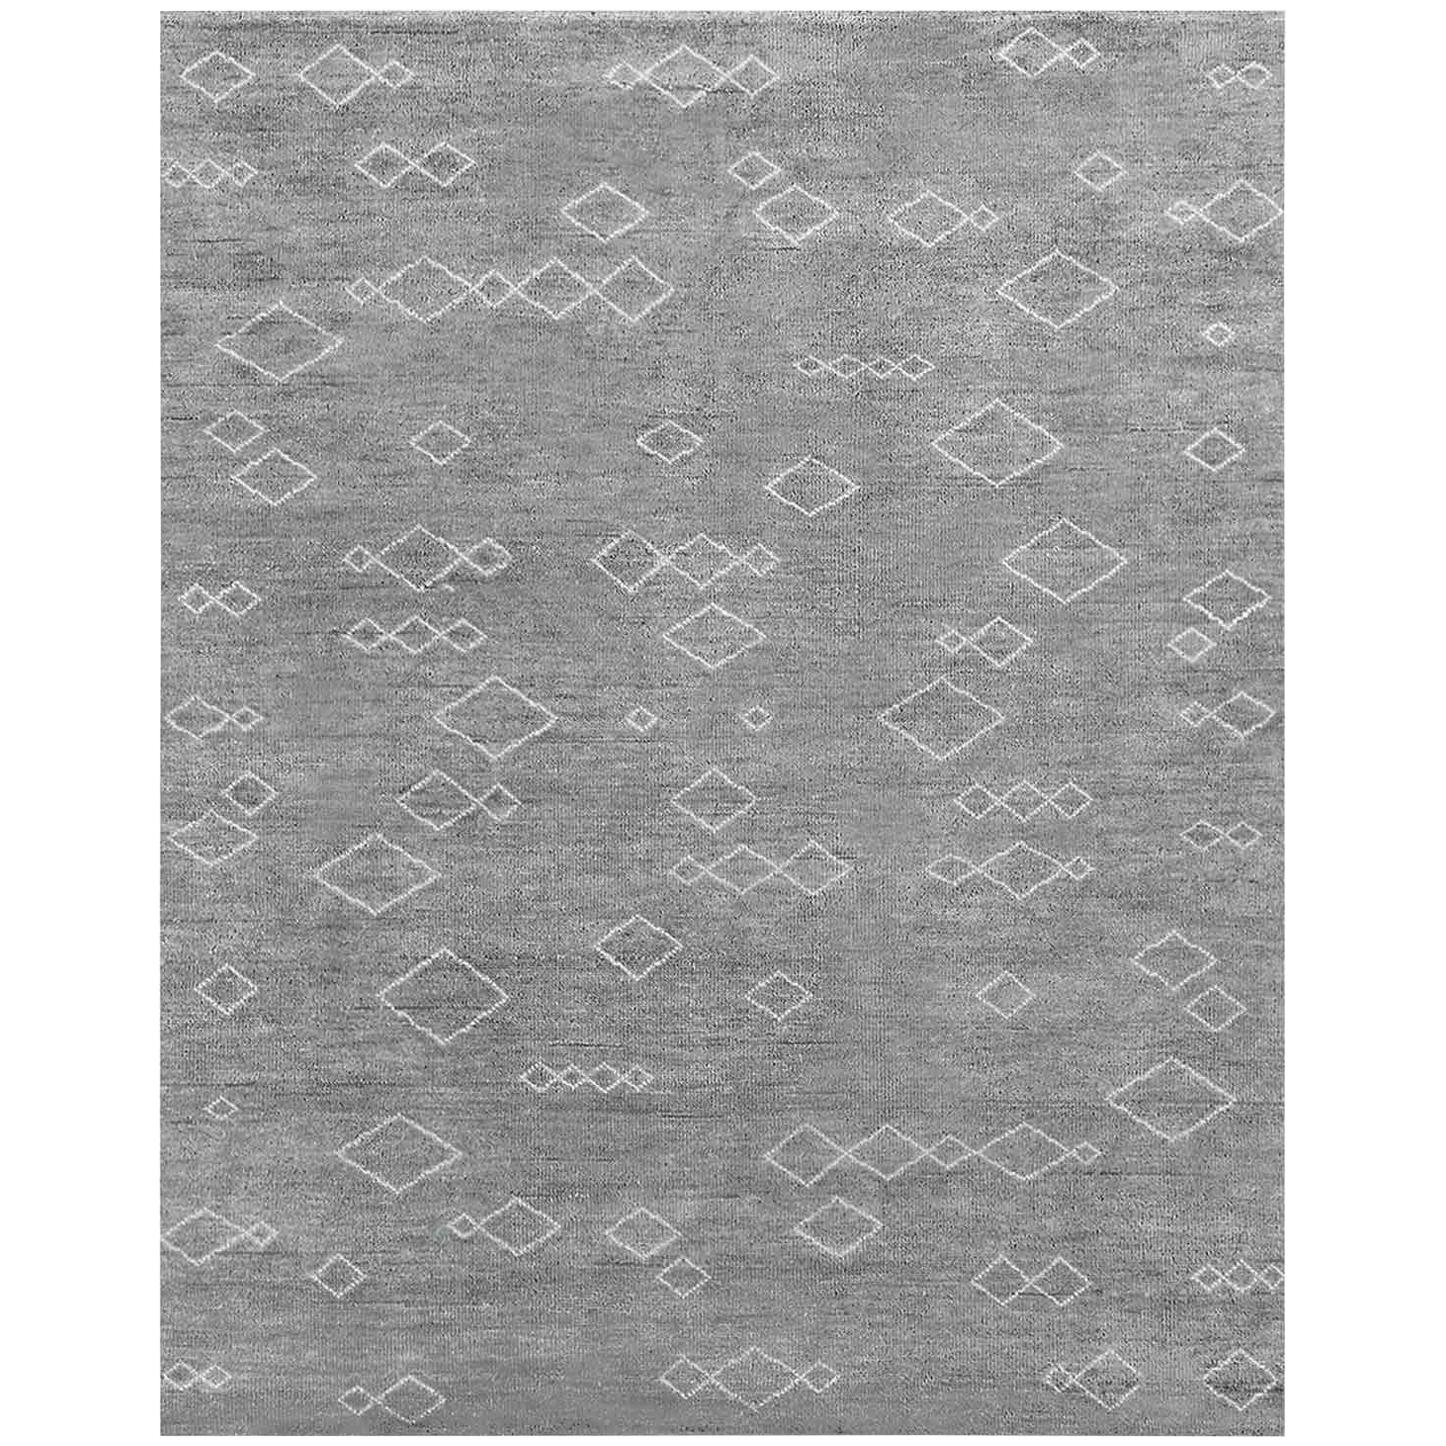 For Sale: Gray (Carbon/Mist) Ben Soleimani Arisa Rug– Moroccan Hand-knotted Plush Wool Carbon/Mist 12'x15'